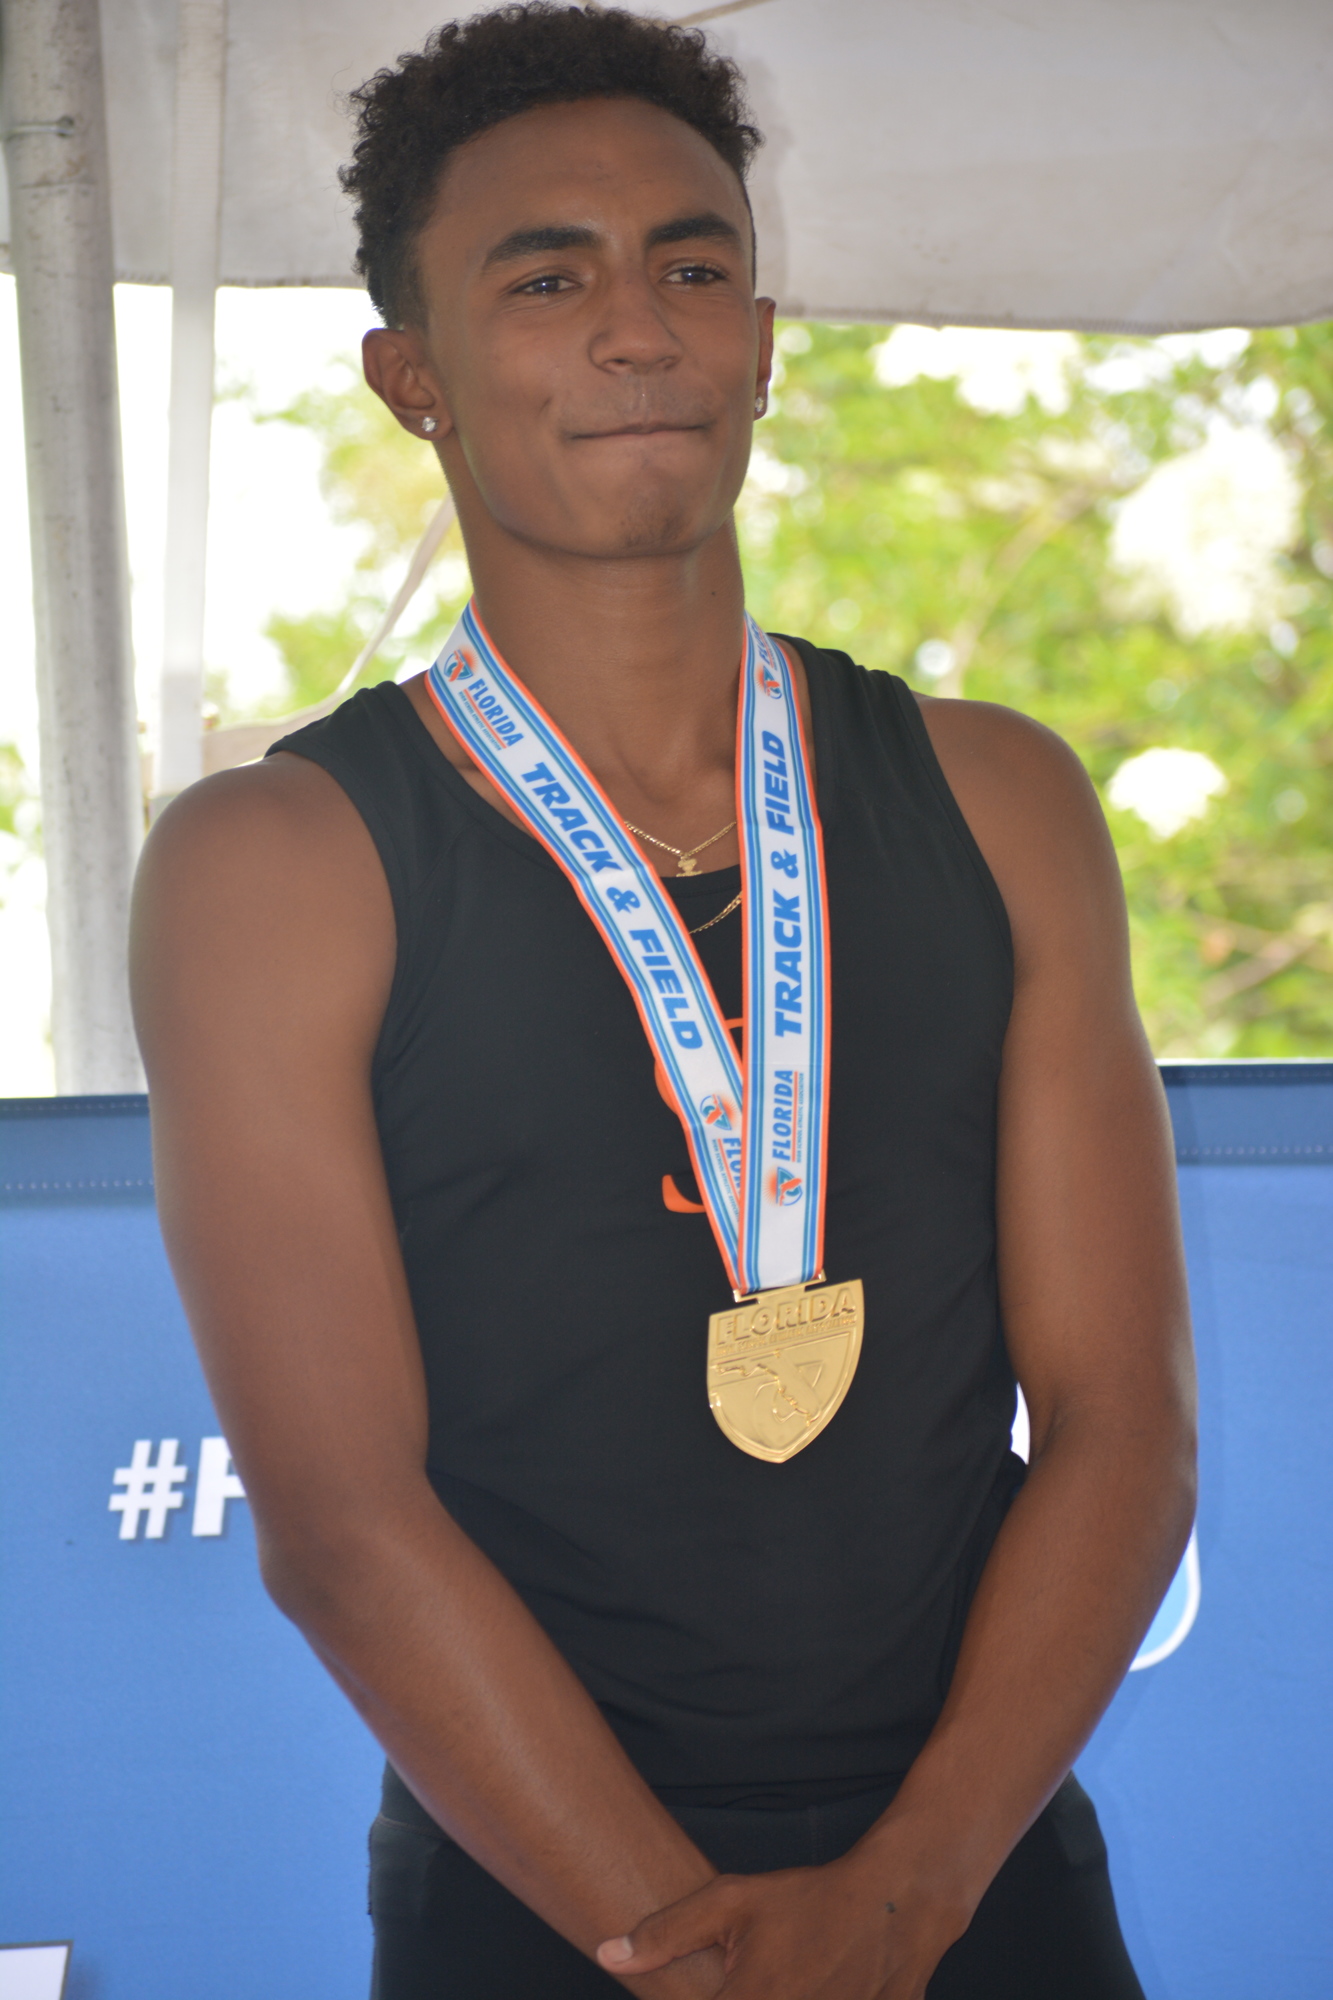 Jaasiel Torres flashed his gold medal after repeating as the Class 4A boys high jump champion at the Florida High School Athletic Association track and field championships at the University of North Florida in Jacksonville.